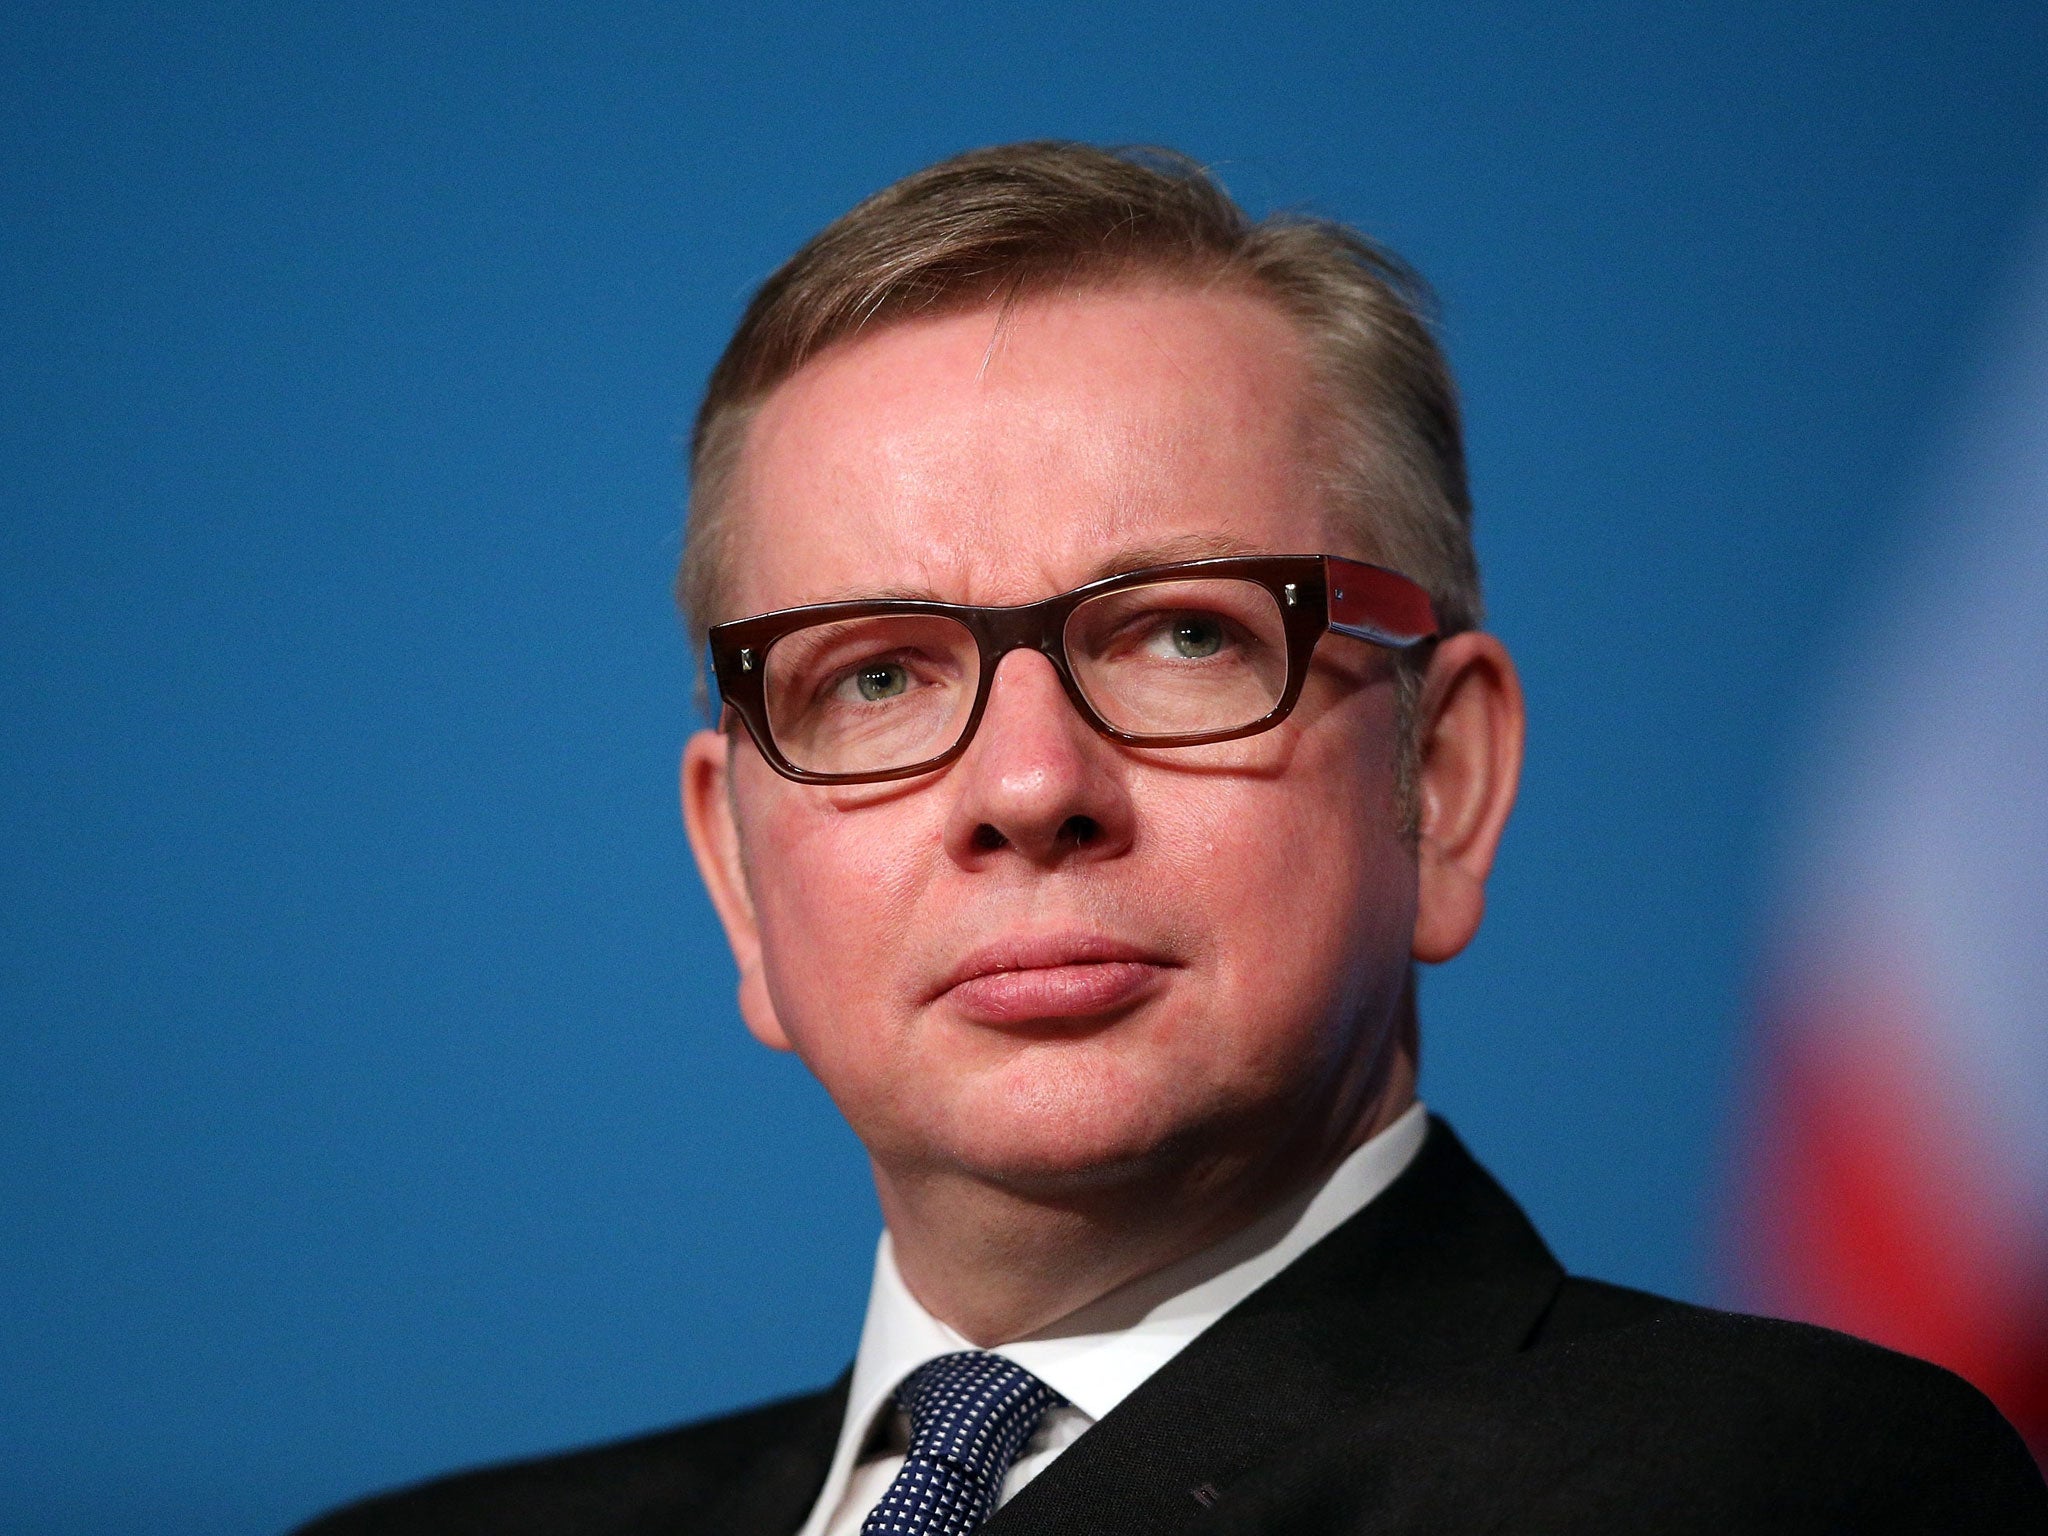 According to a new report, Michael Gove is wrong to suggest his new maths curriculum is based on those of high performing countries like Singapore